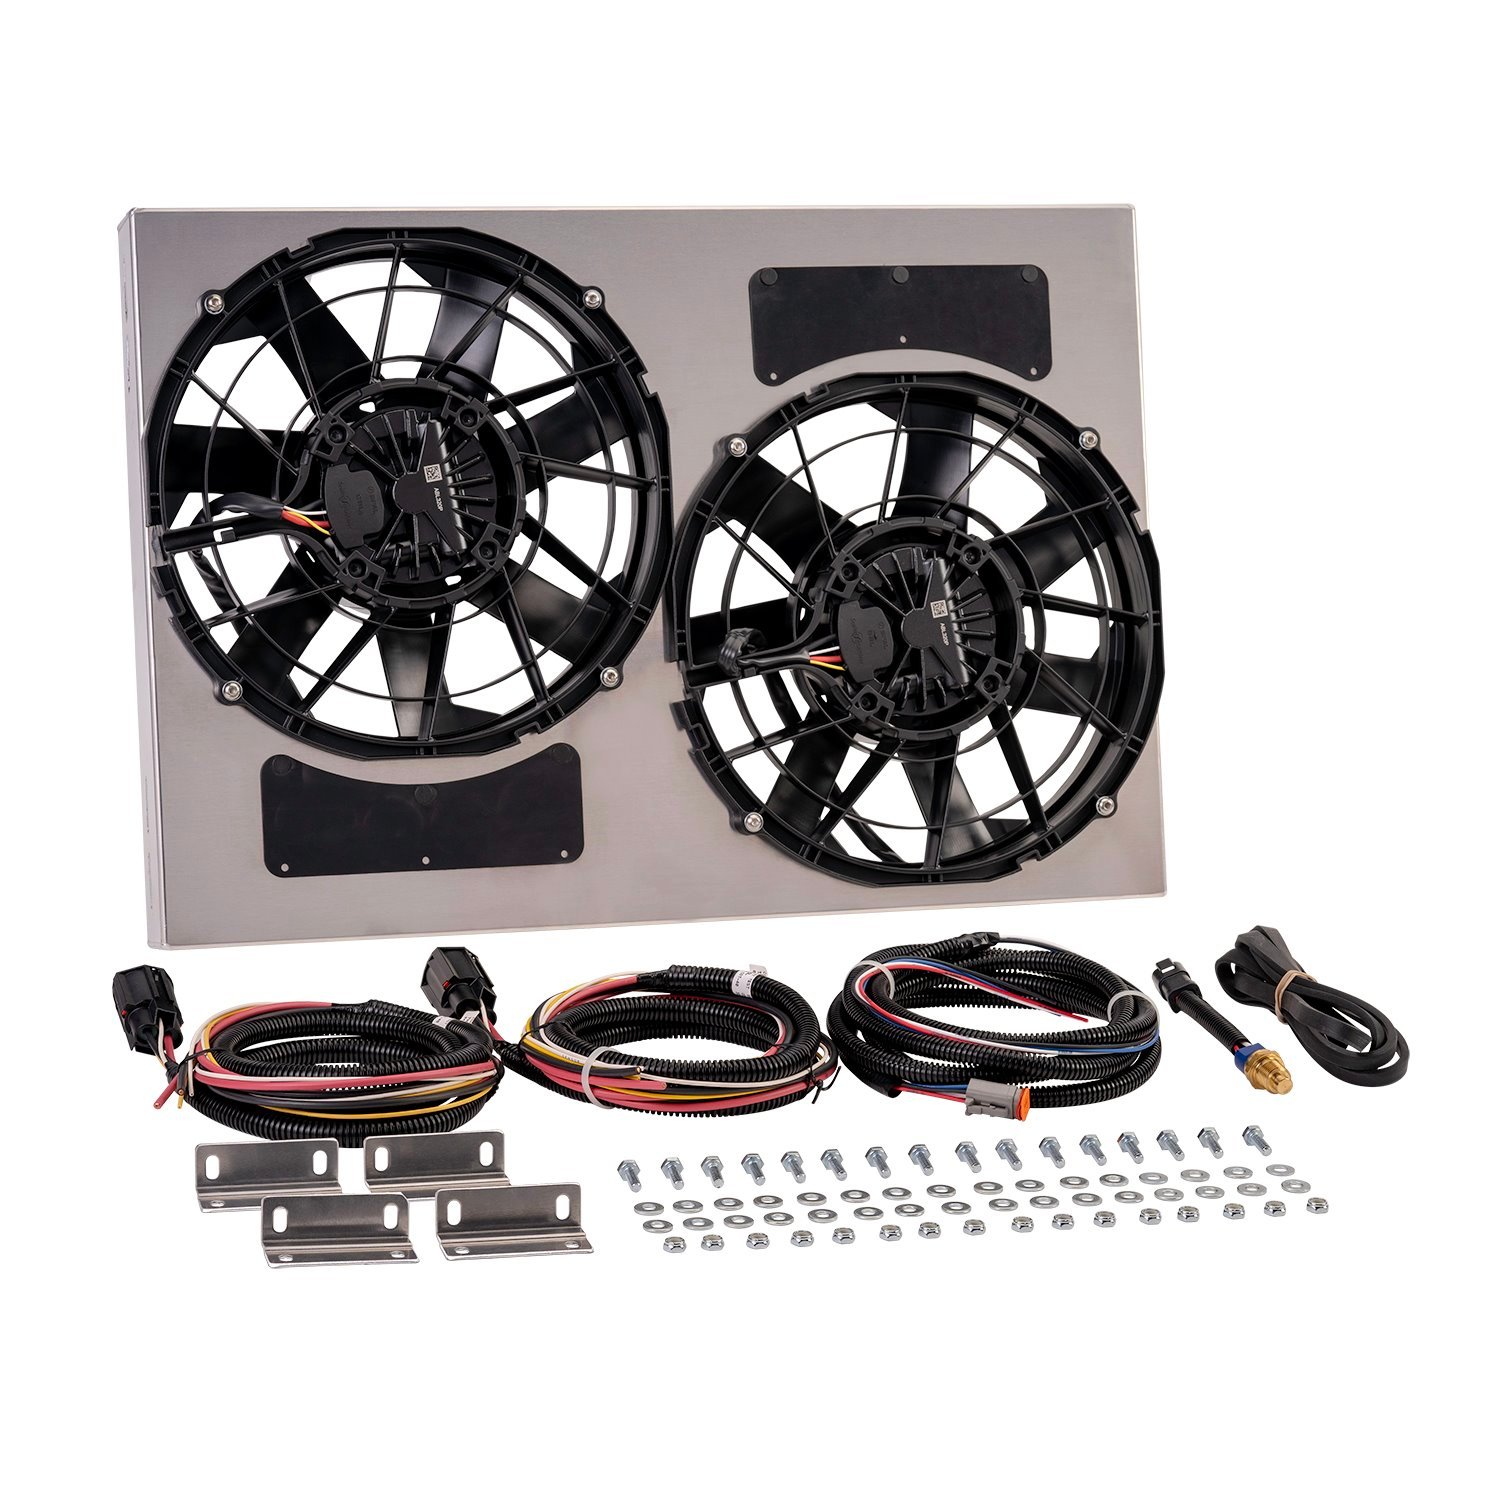 67942-215 Brushless Dual Powerpack 12 in. Radiator Fan Assembly with Integrated 215 Degree PWM Controller